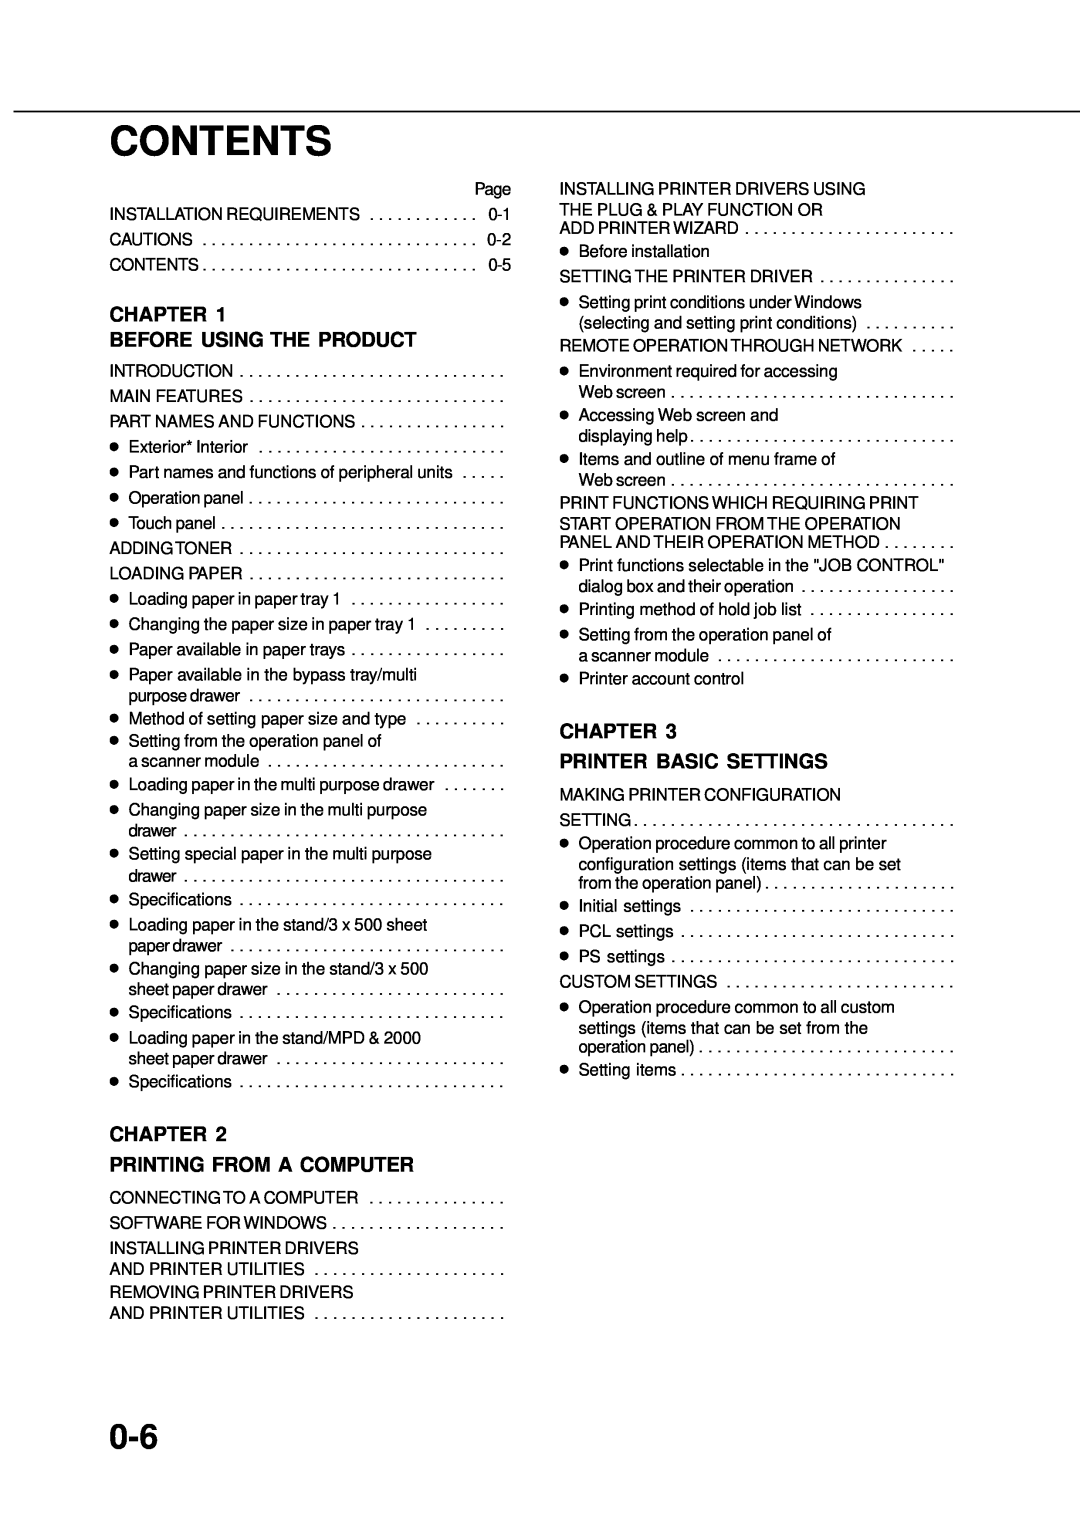 Sharp AR_M280, AR-350 operation manual Contents, Chapter Before Using The Product, Chapter Printer Basic Settings 